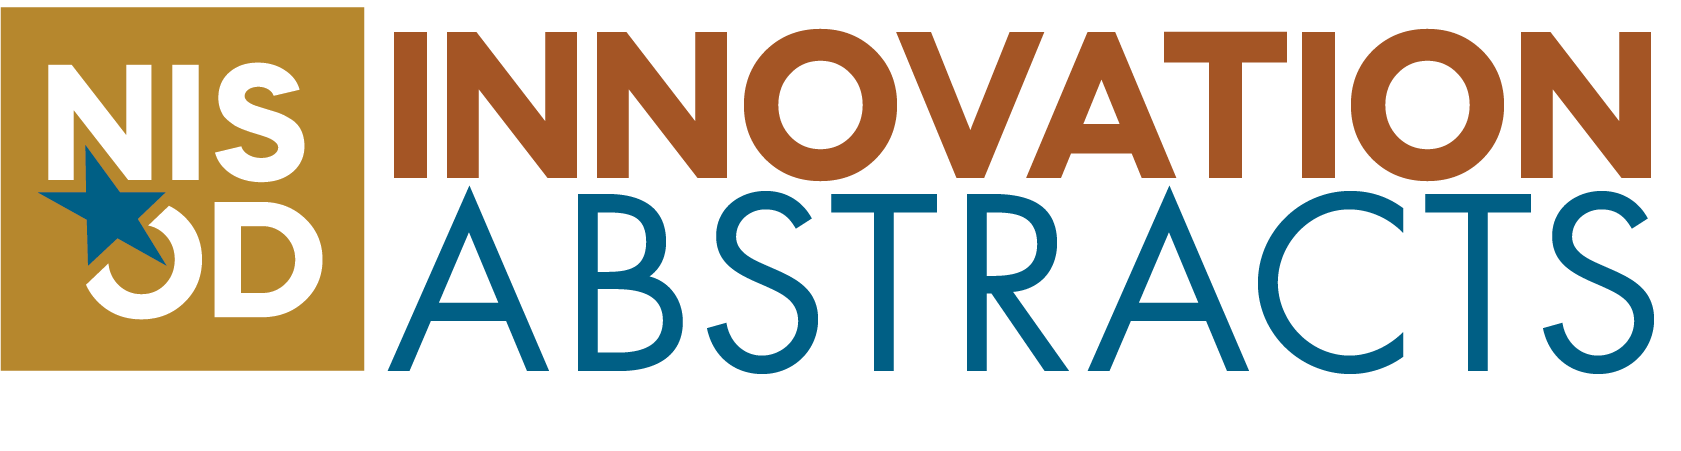 Innovation Abstracts